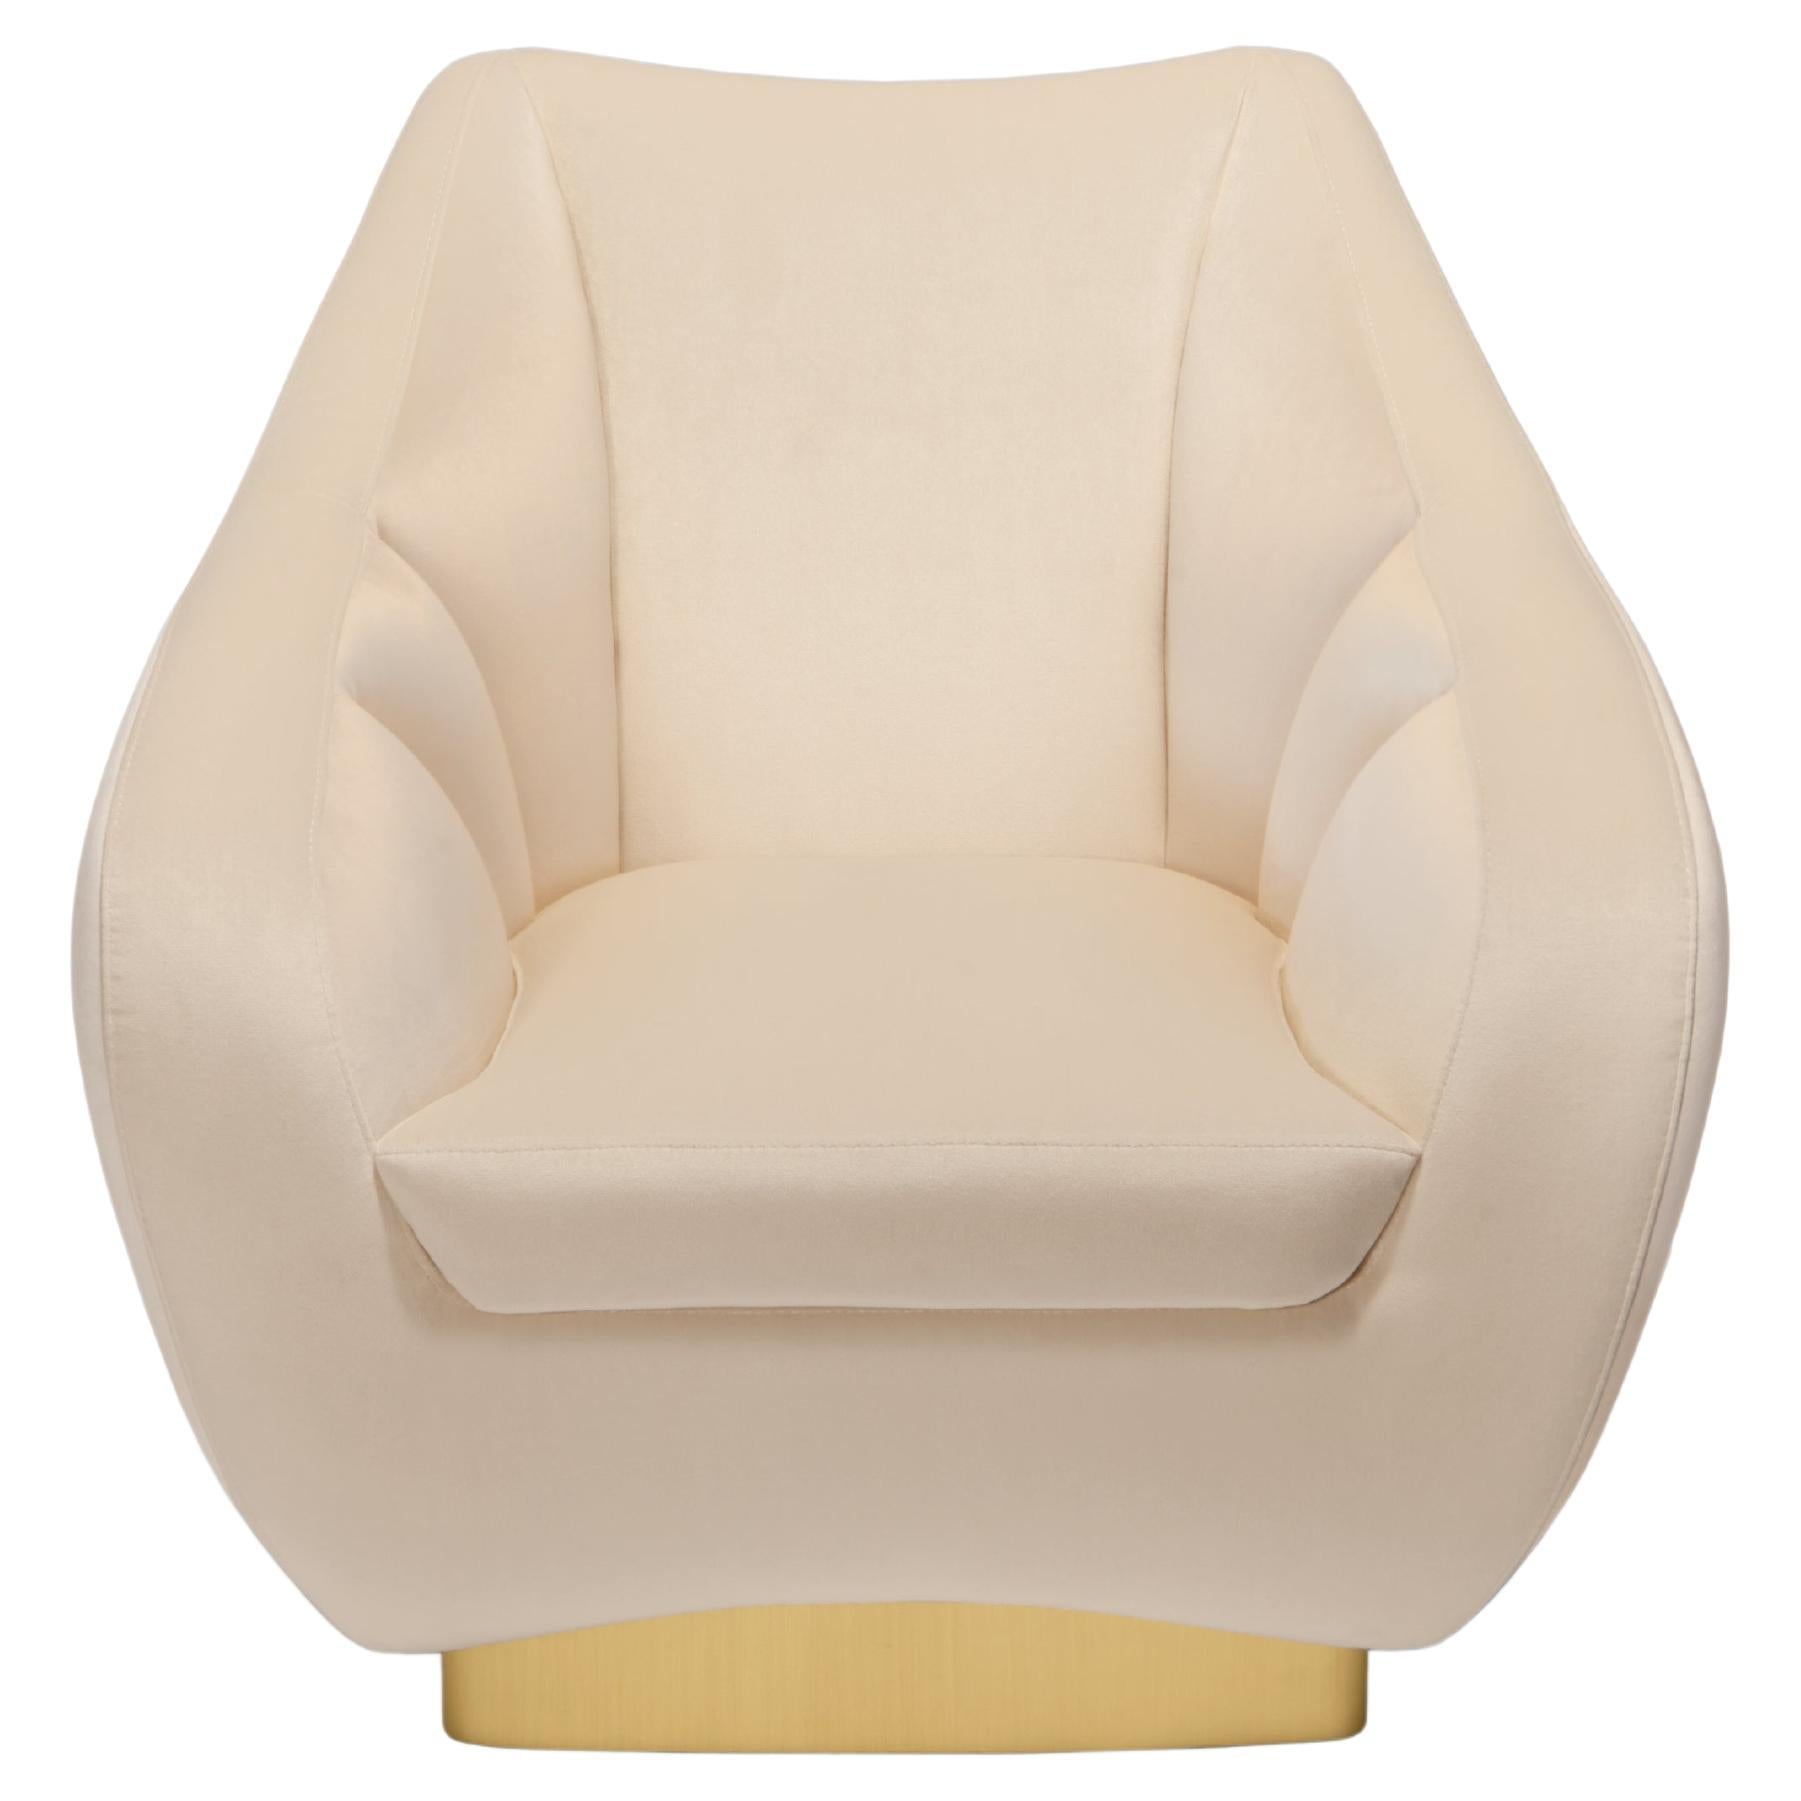 Figueroa Armchair by InsidherLand For Sale